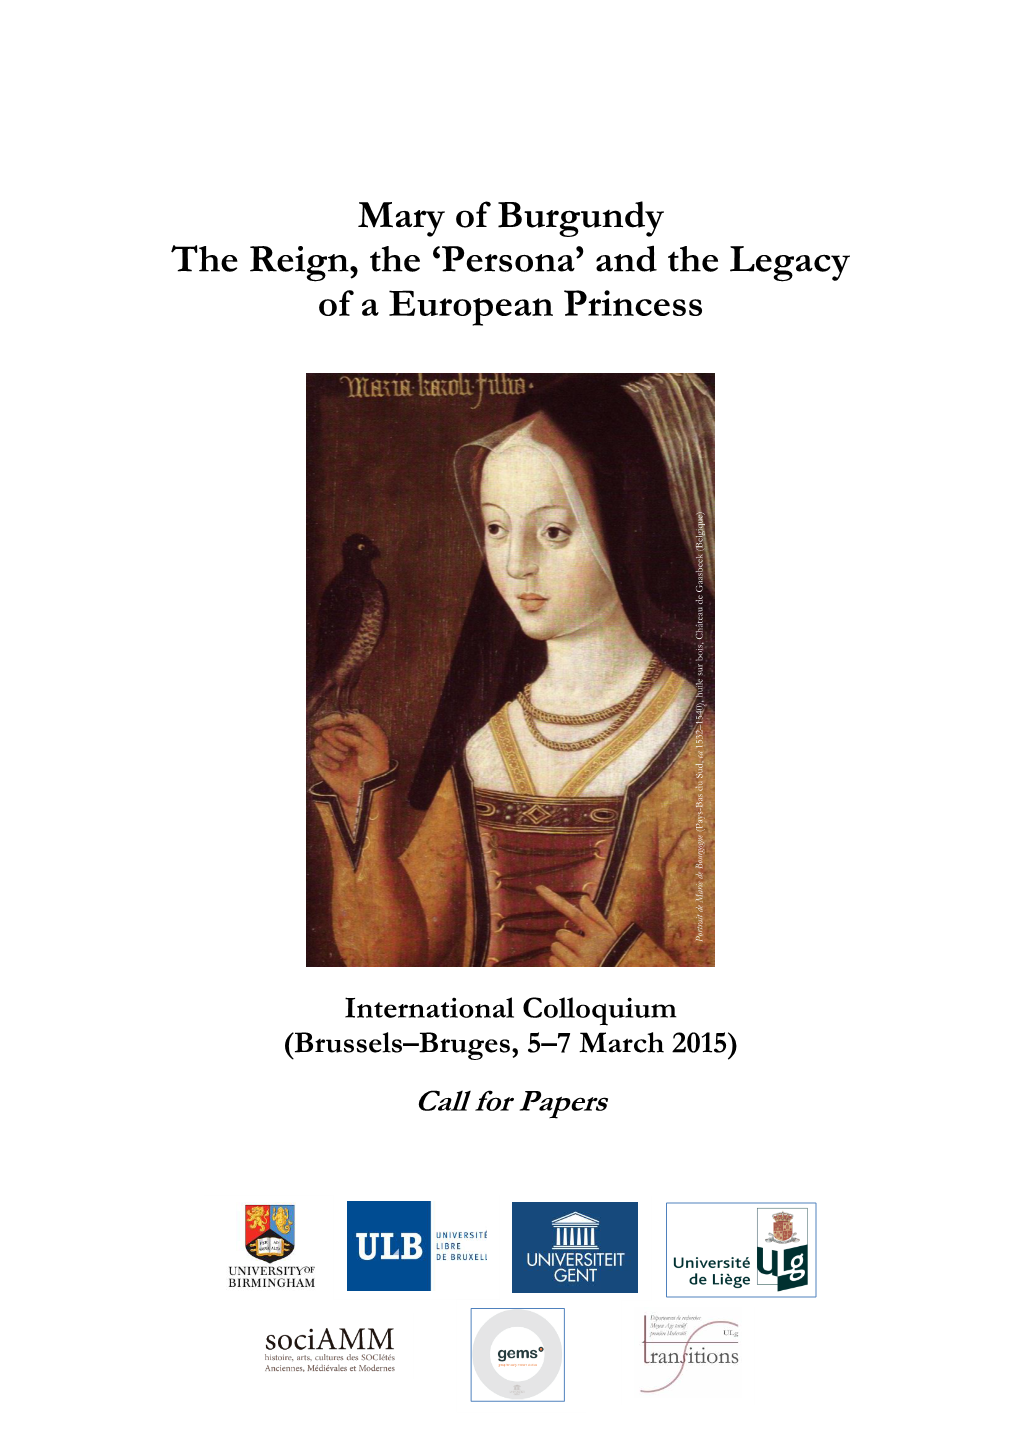 Mary of Burgundy the Reign, the 'Persona' and the Legacy of a European Princess